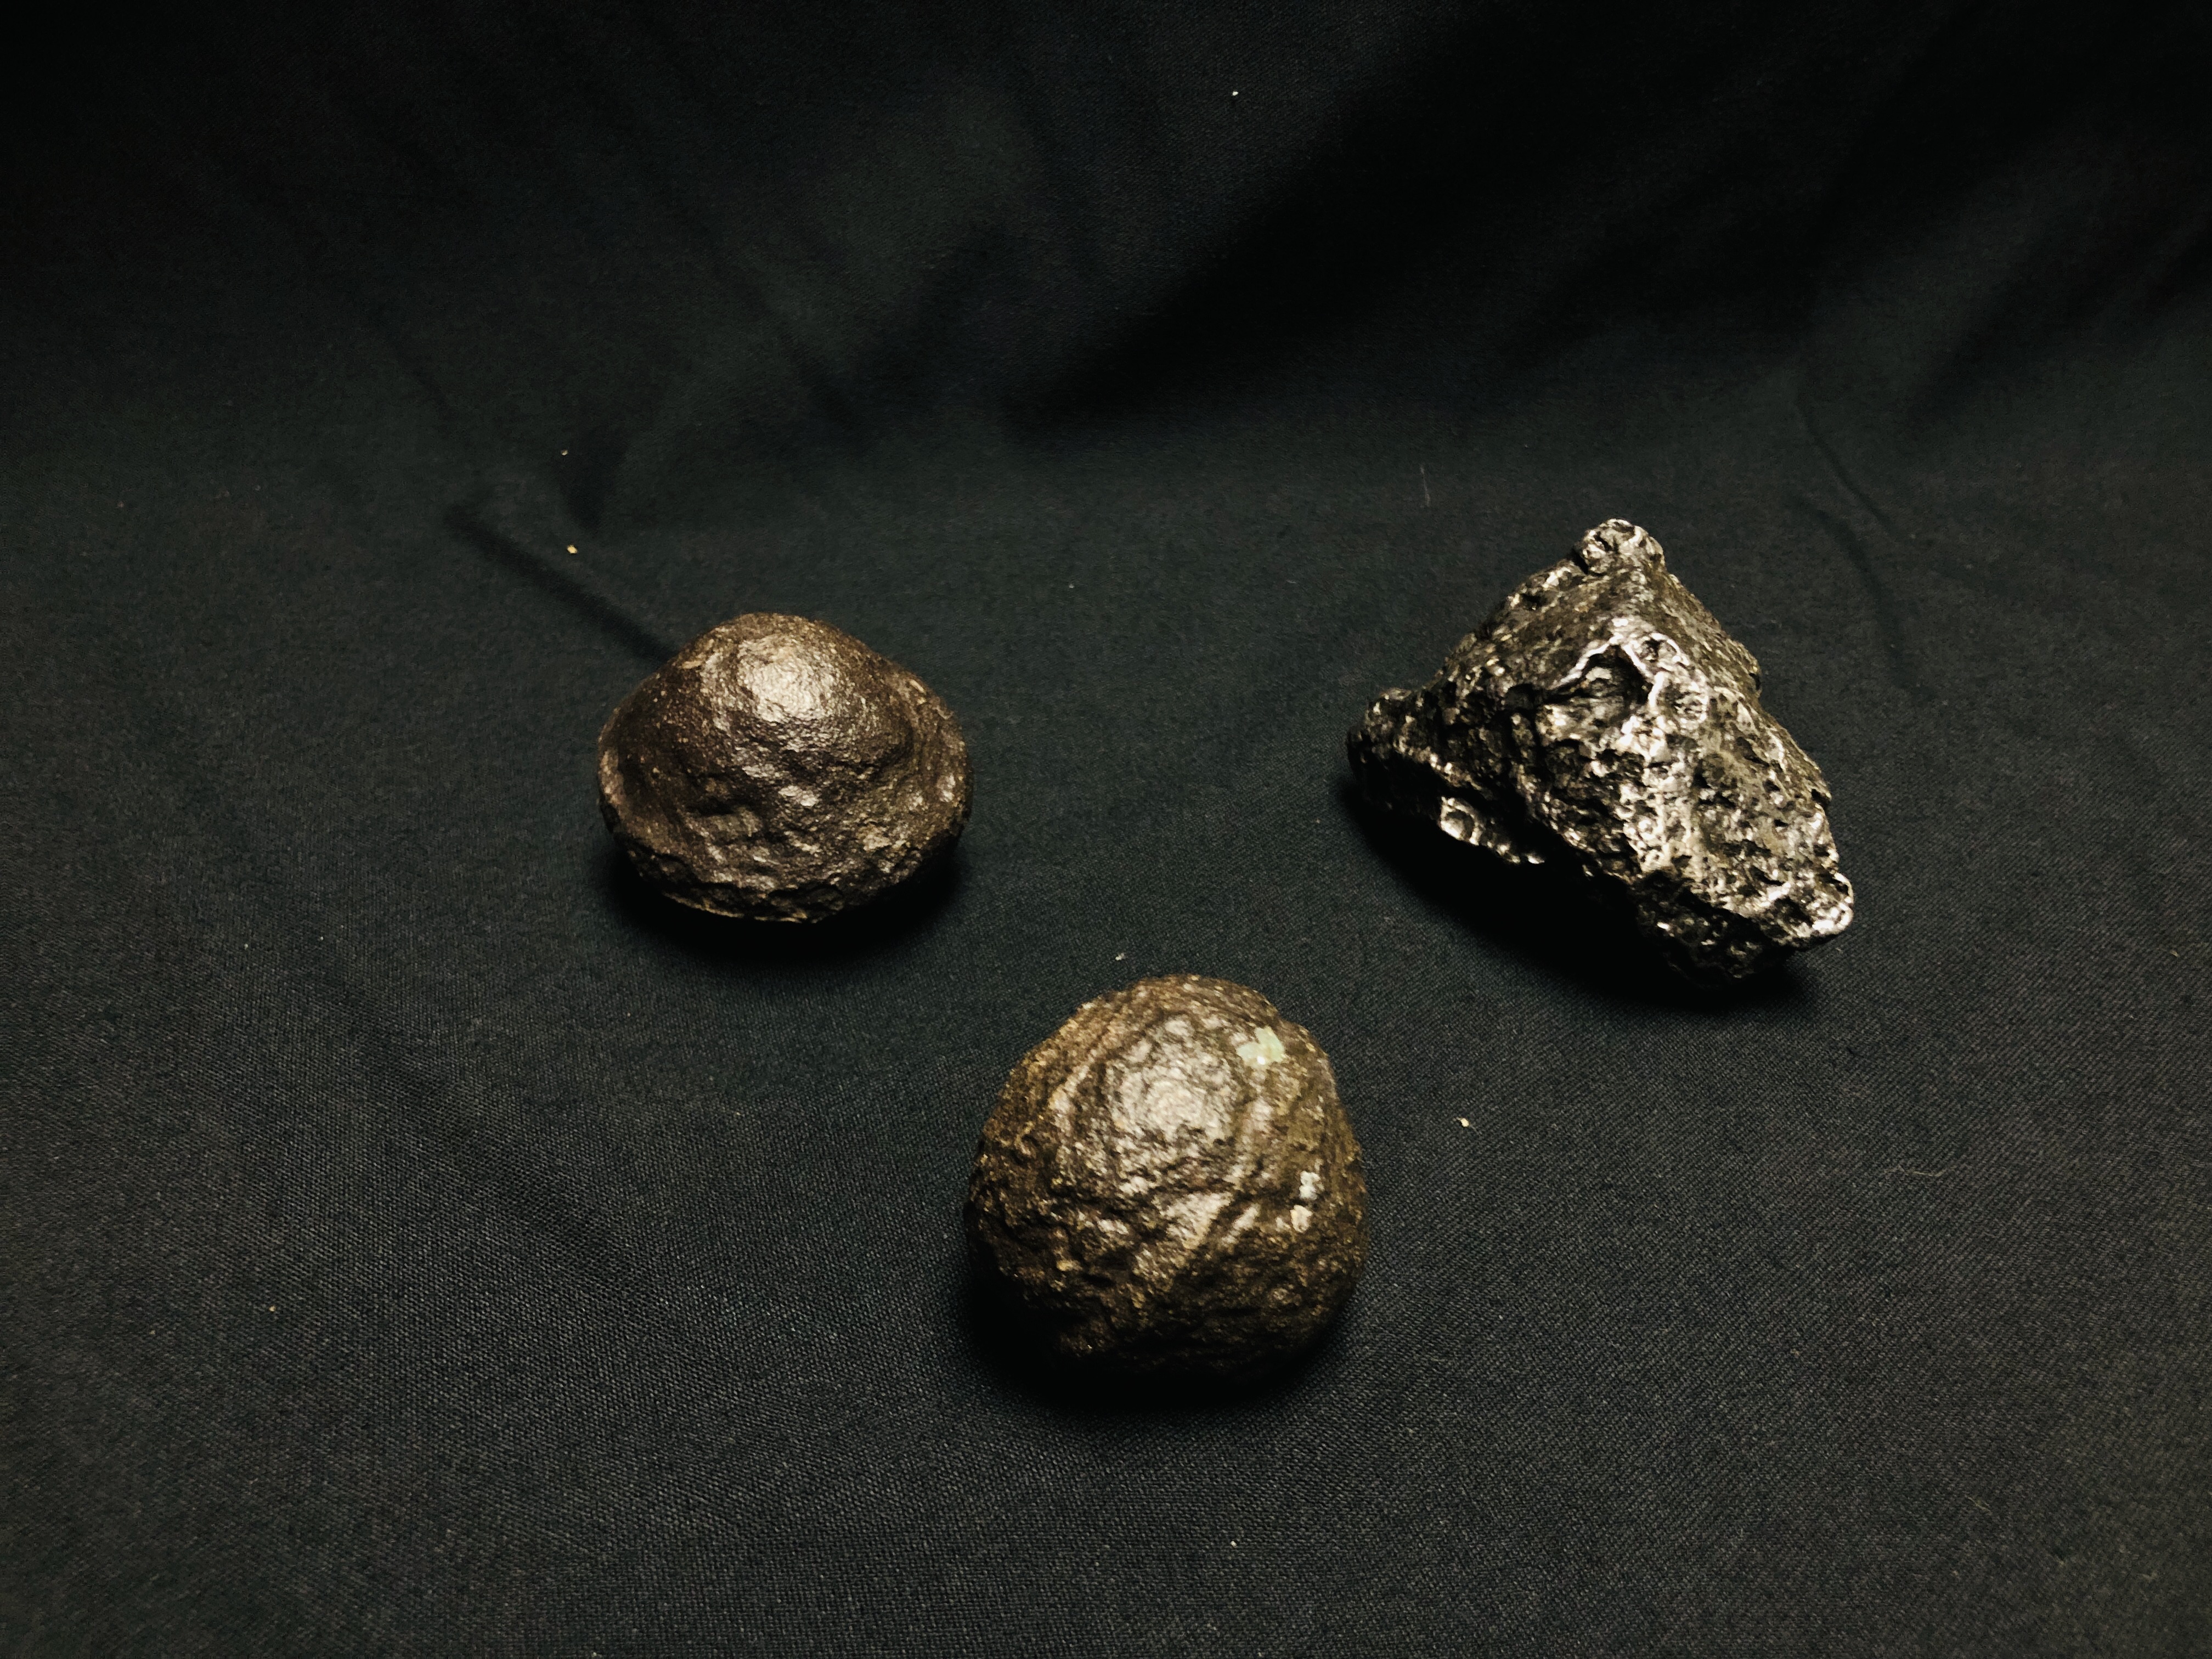 A GROUP OF 3 METEORITE EXAMPLES FROM AROUND THE WORLD, VARIOUS COMPOSITIONS AND SIZES,